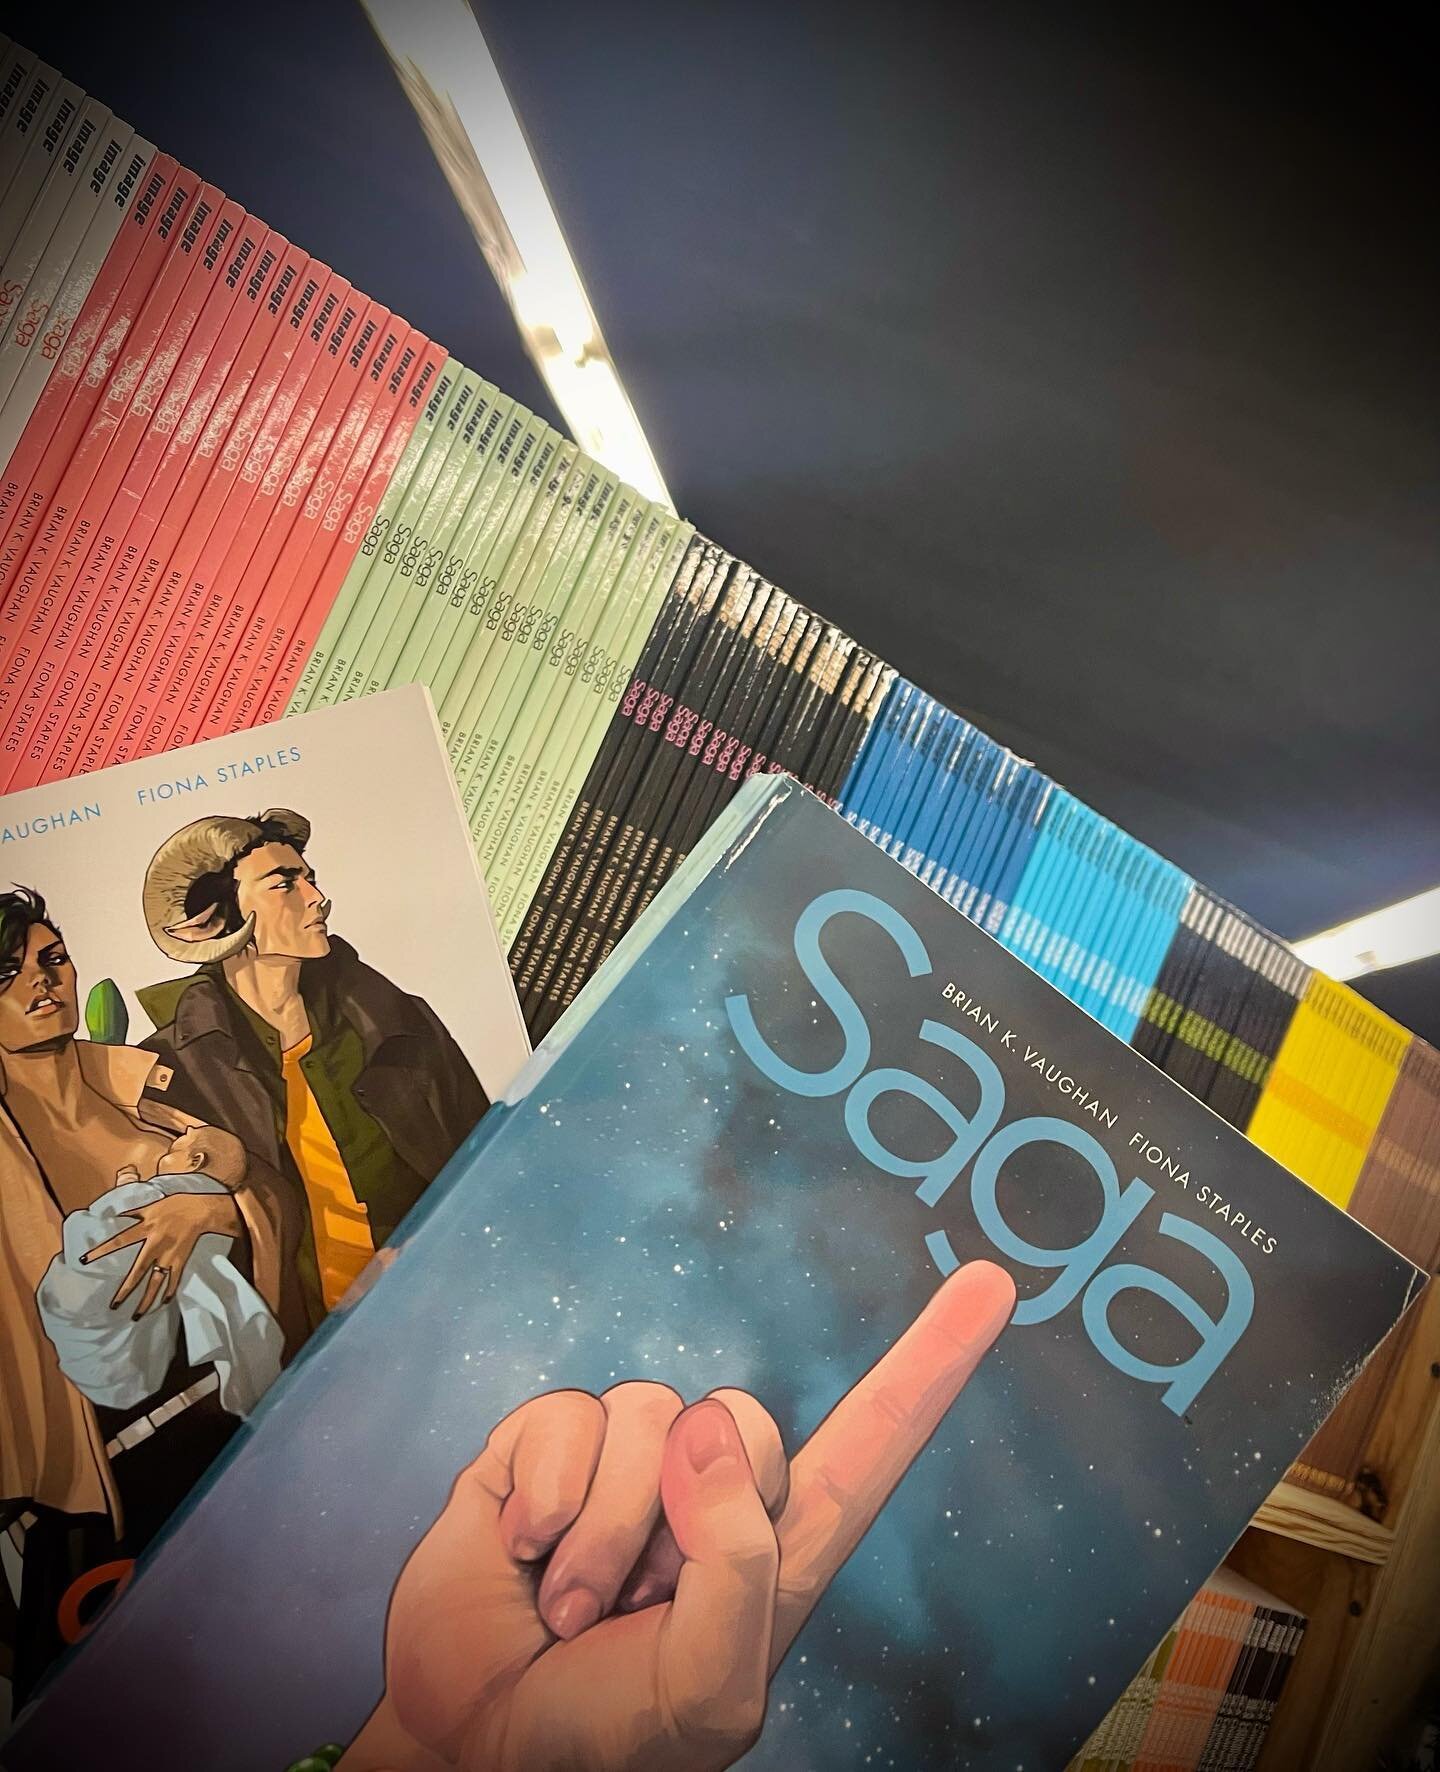 Now more than ever is the perfect time to start, finish, catch-up on, or re-read this instant classic! With issue 55 just around the corner, you definitely want to make sure the rest of this epic story is fresh on your mind! We have plenty of Saga to